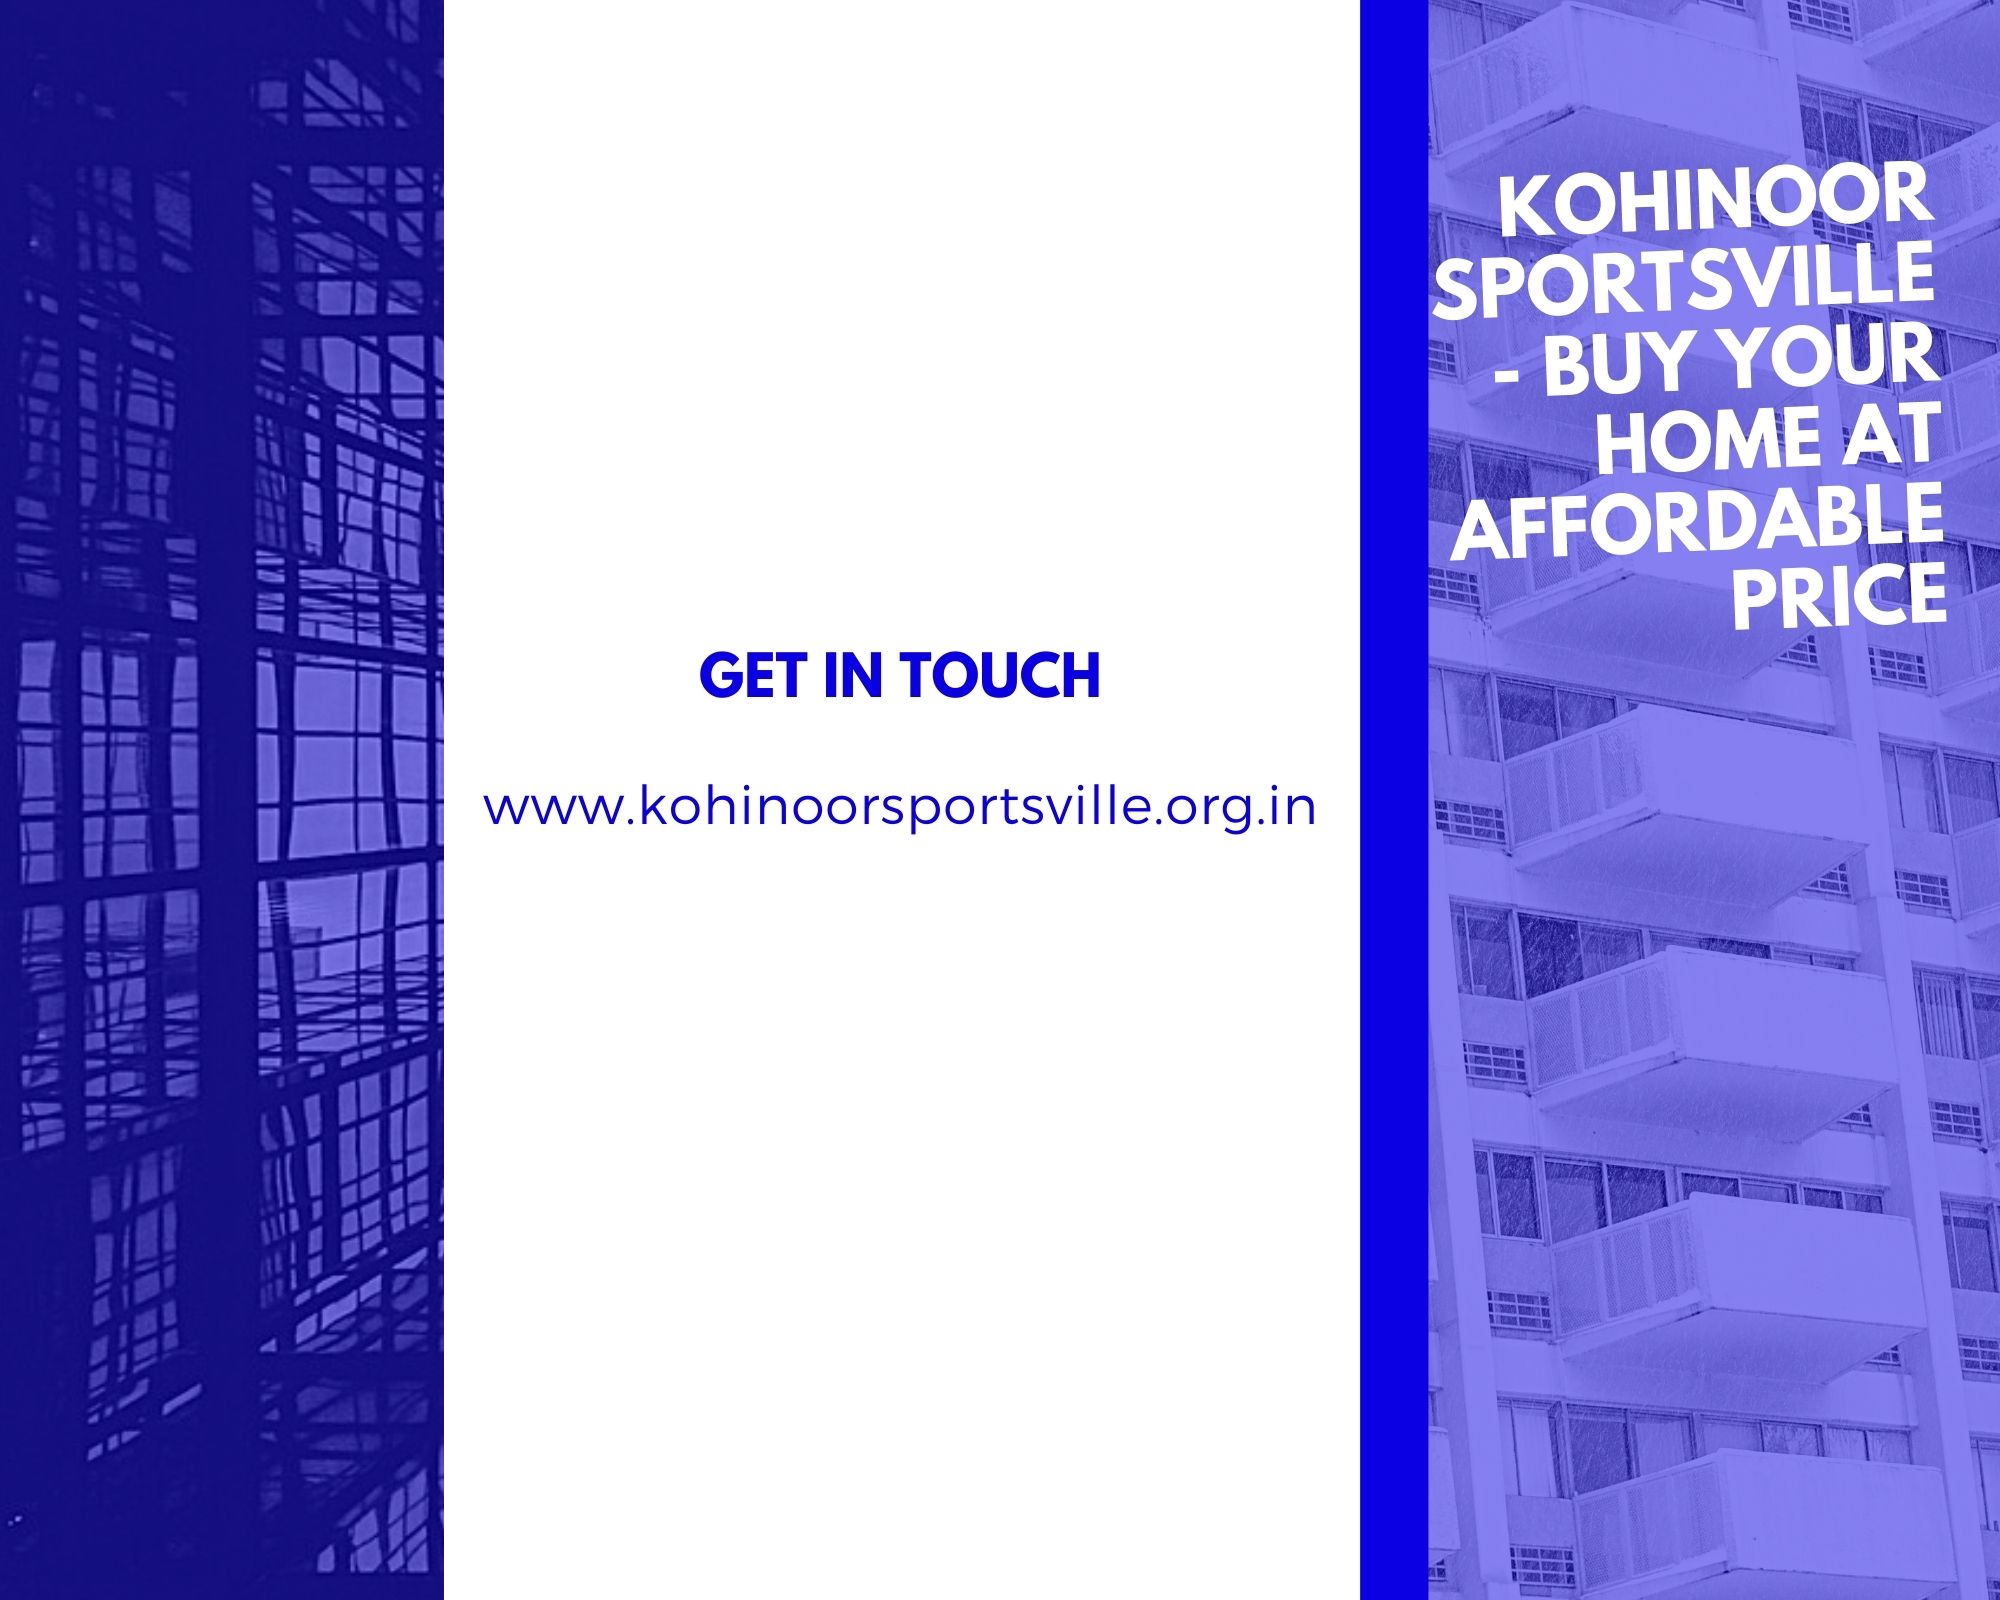 Kohinoor Sportsville - Buy Your Home at Affordable Price